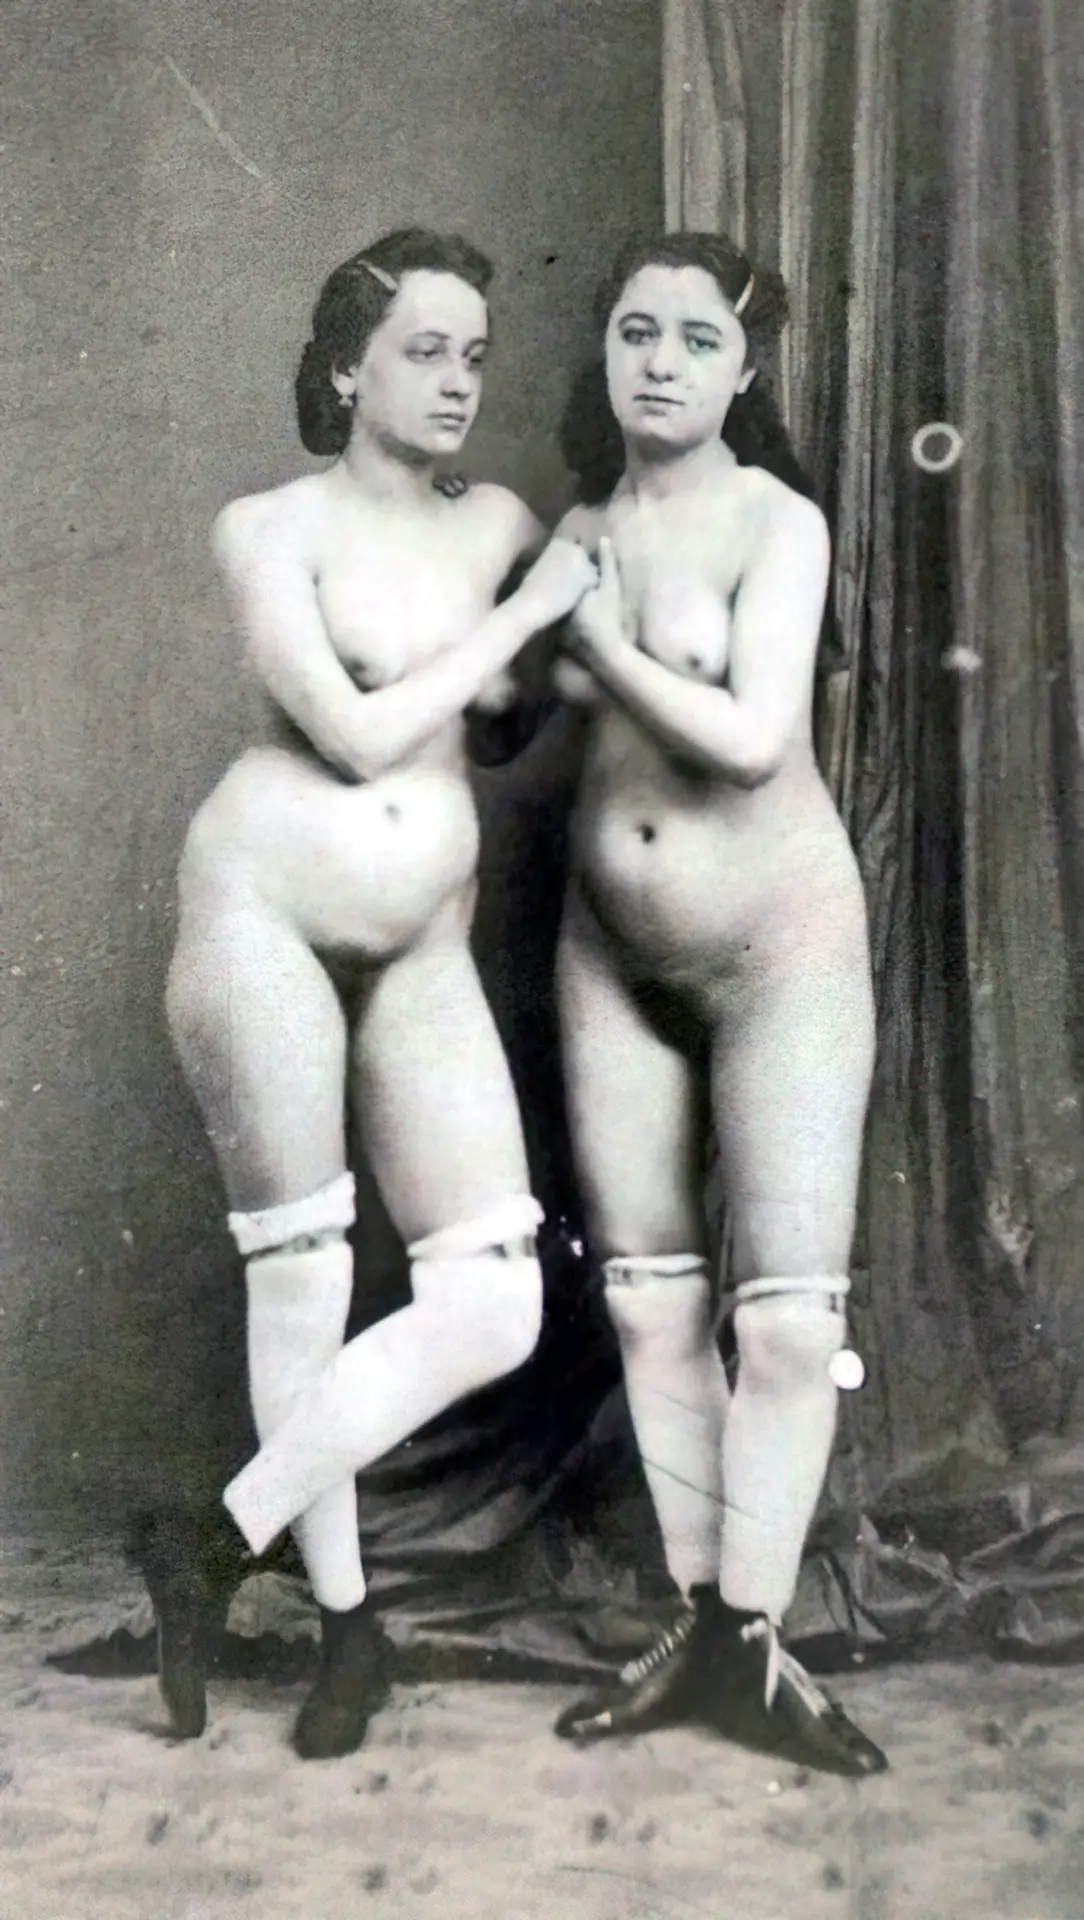 Two sad looking antique women hold each other's hands while posing naked